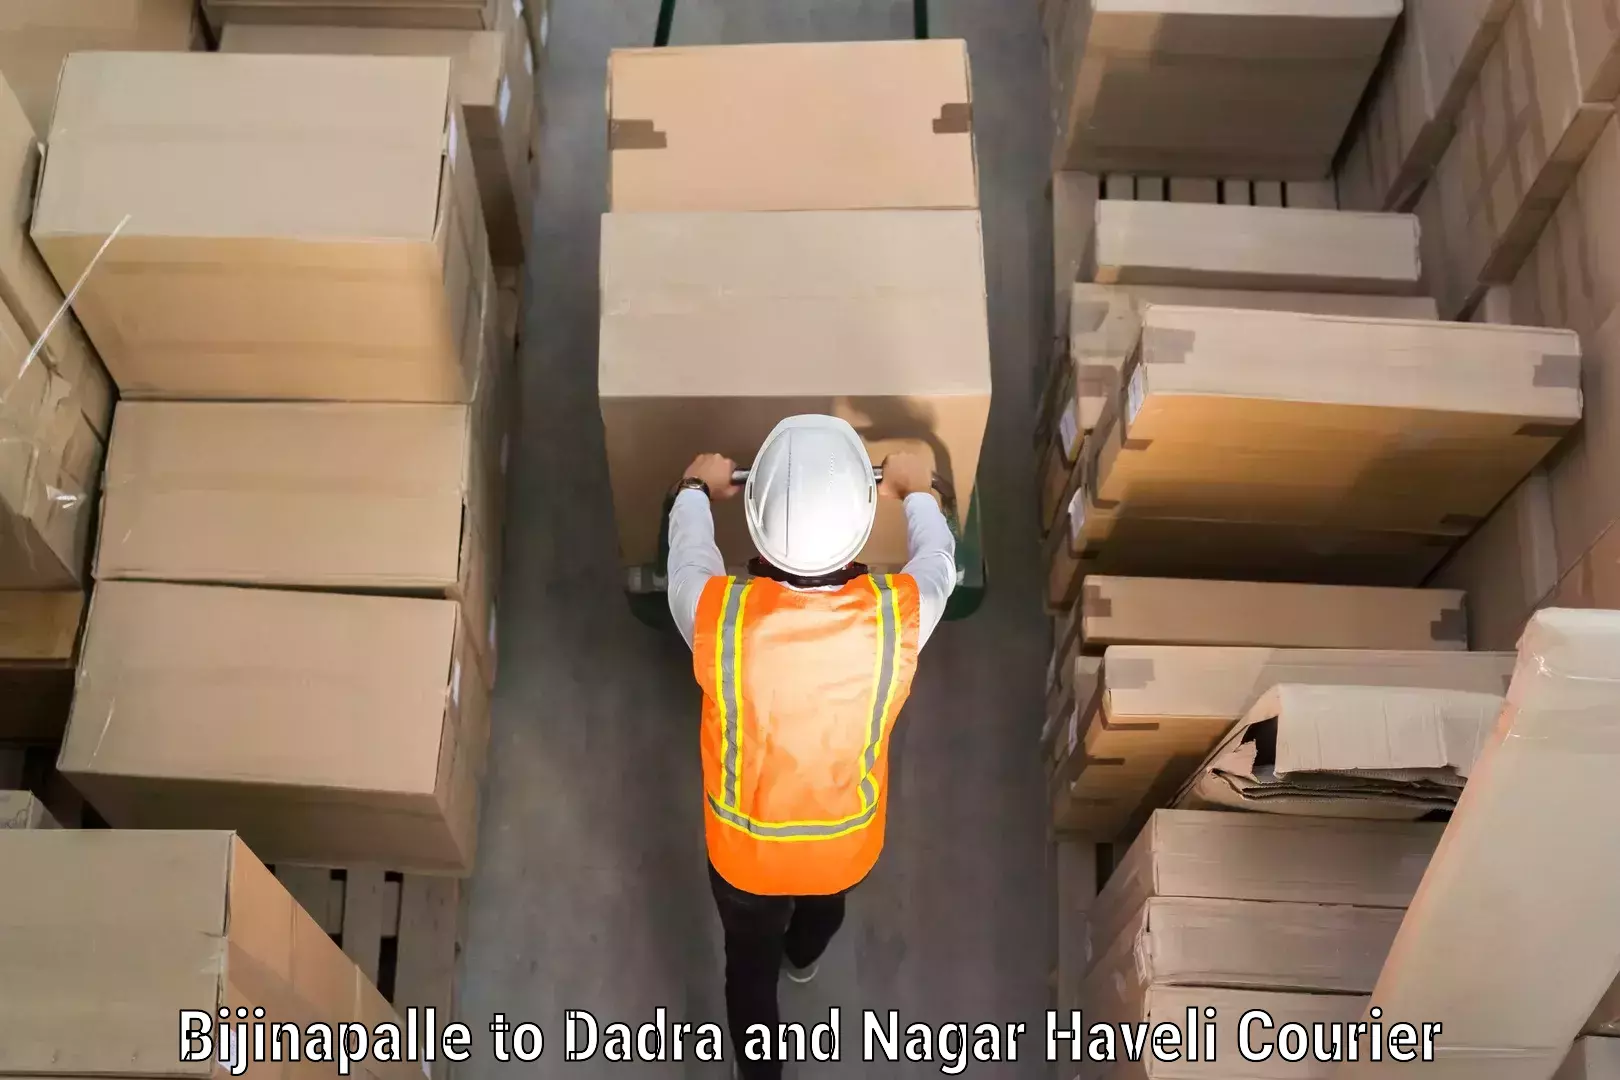 Luggage shipping specialists Bijinapalle to Dadra and Nagar Haveli